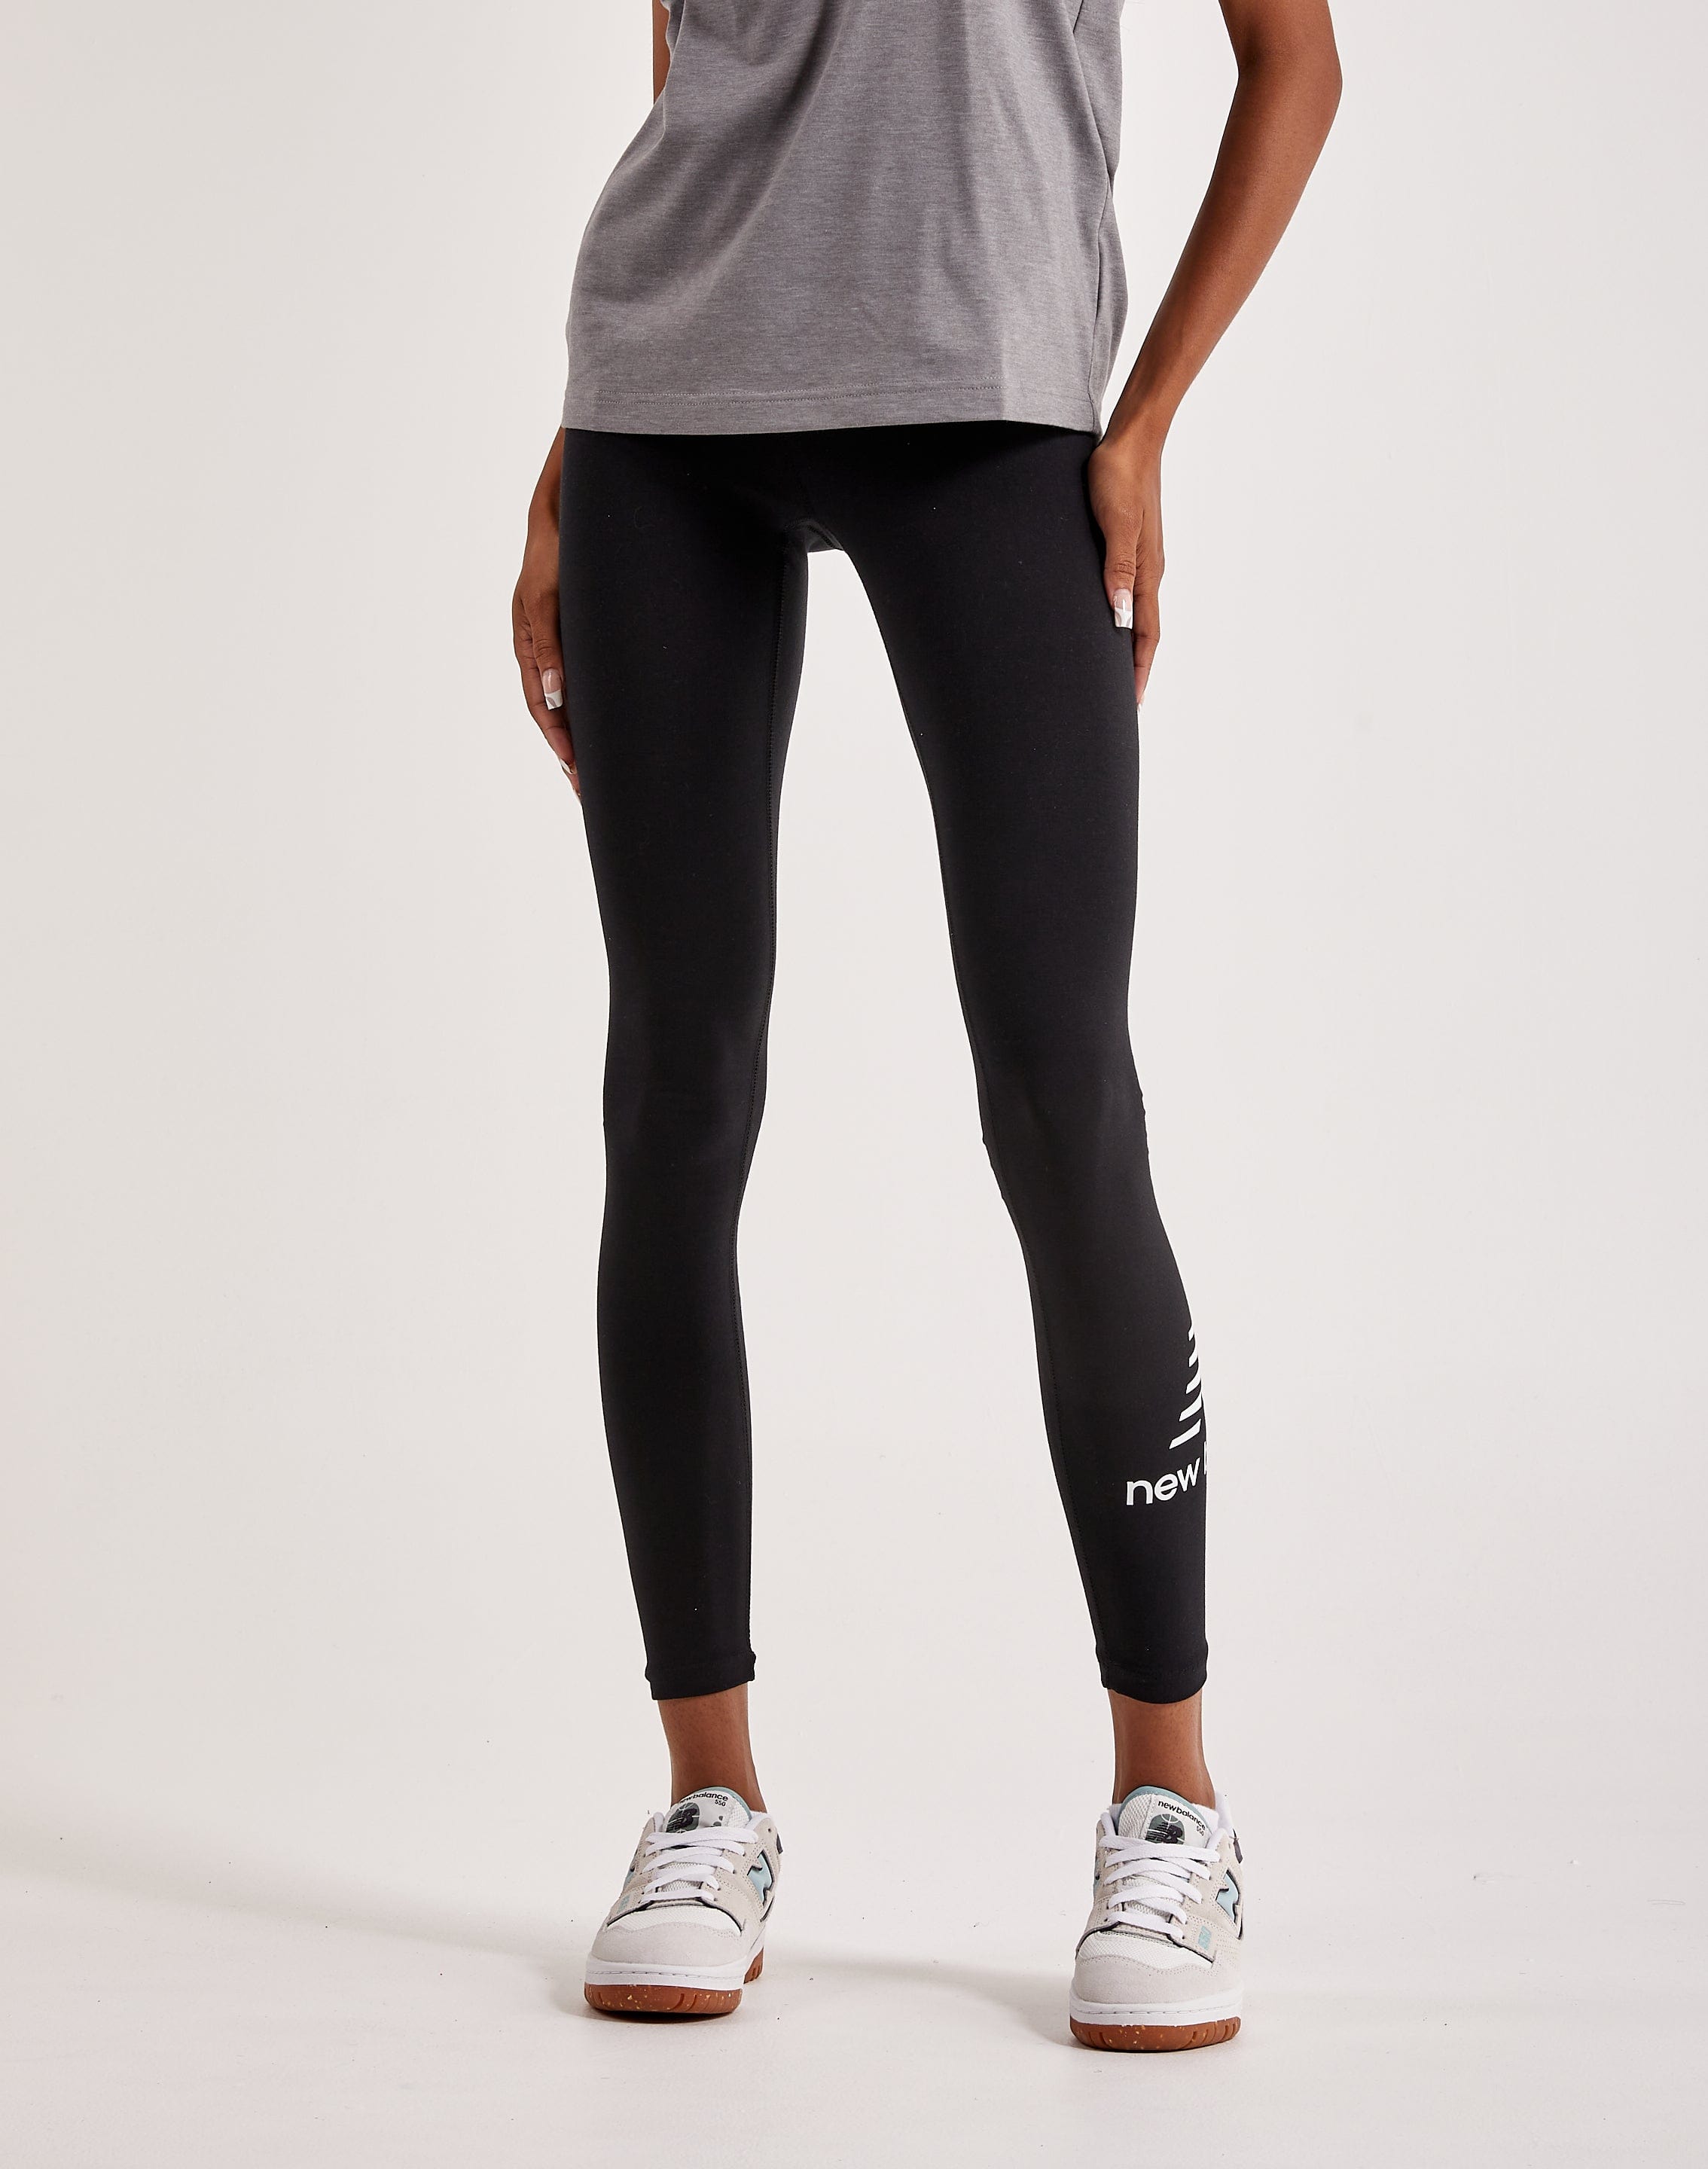 – Stacked Leggings Balance DTLR Essentials New